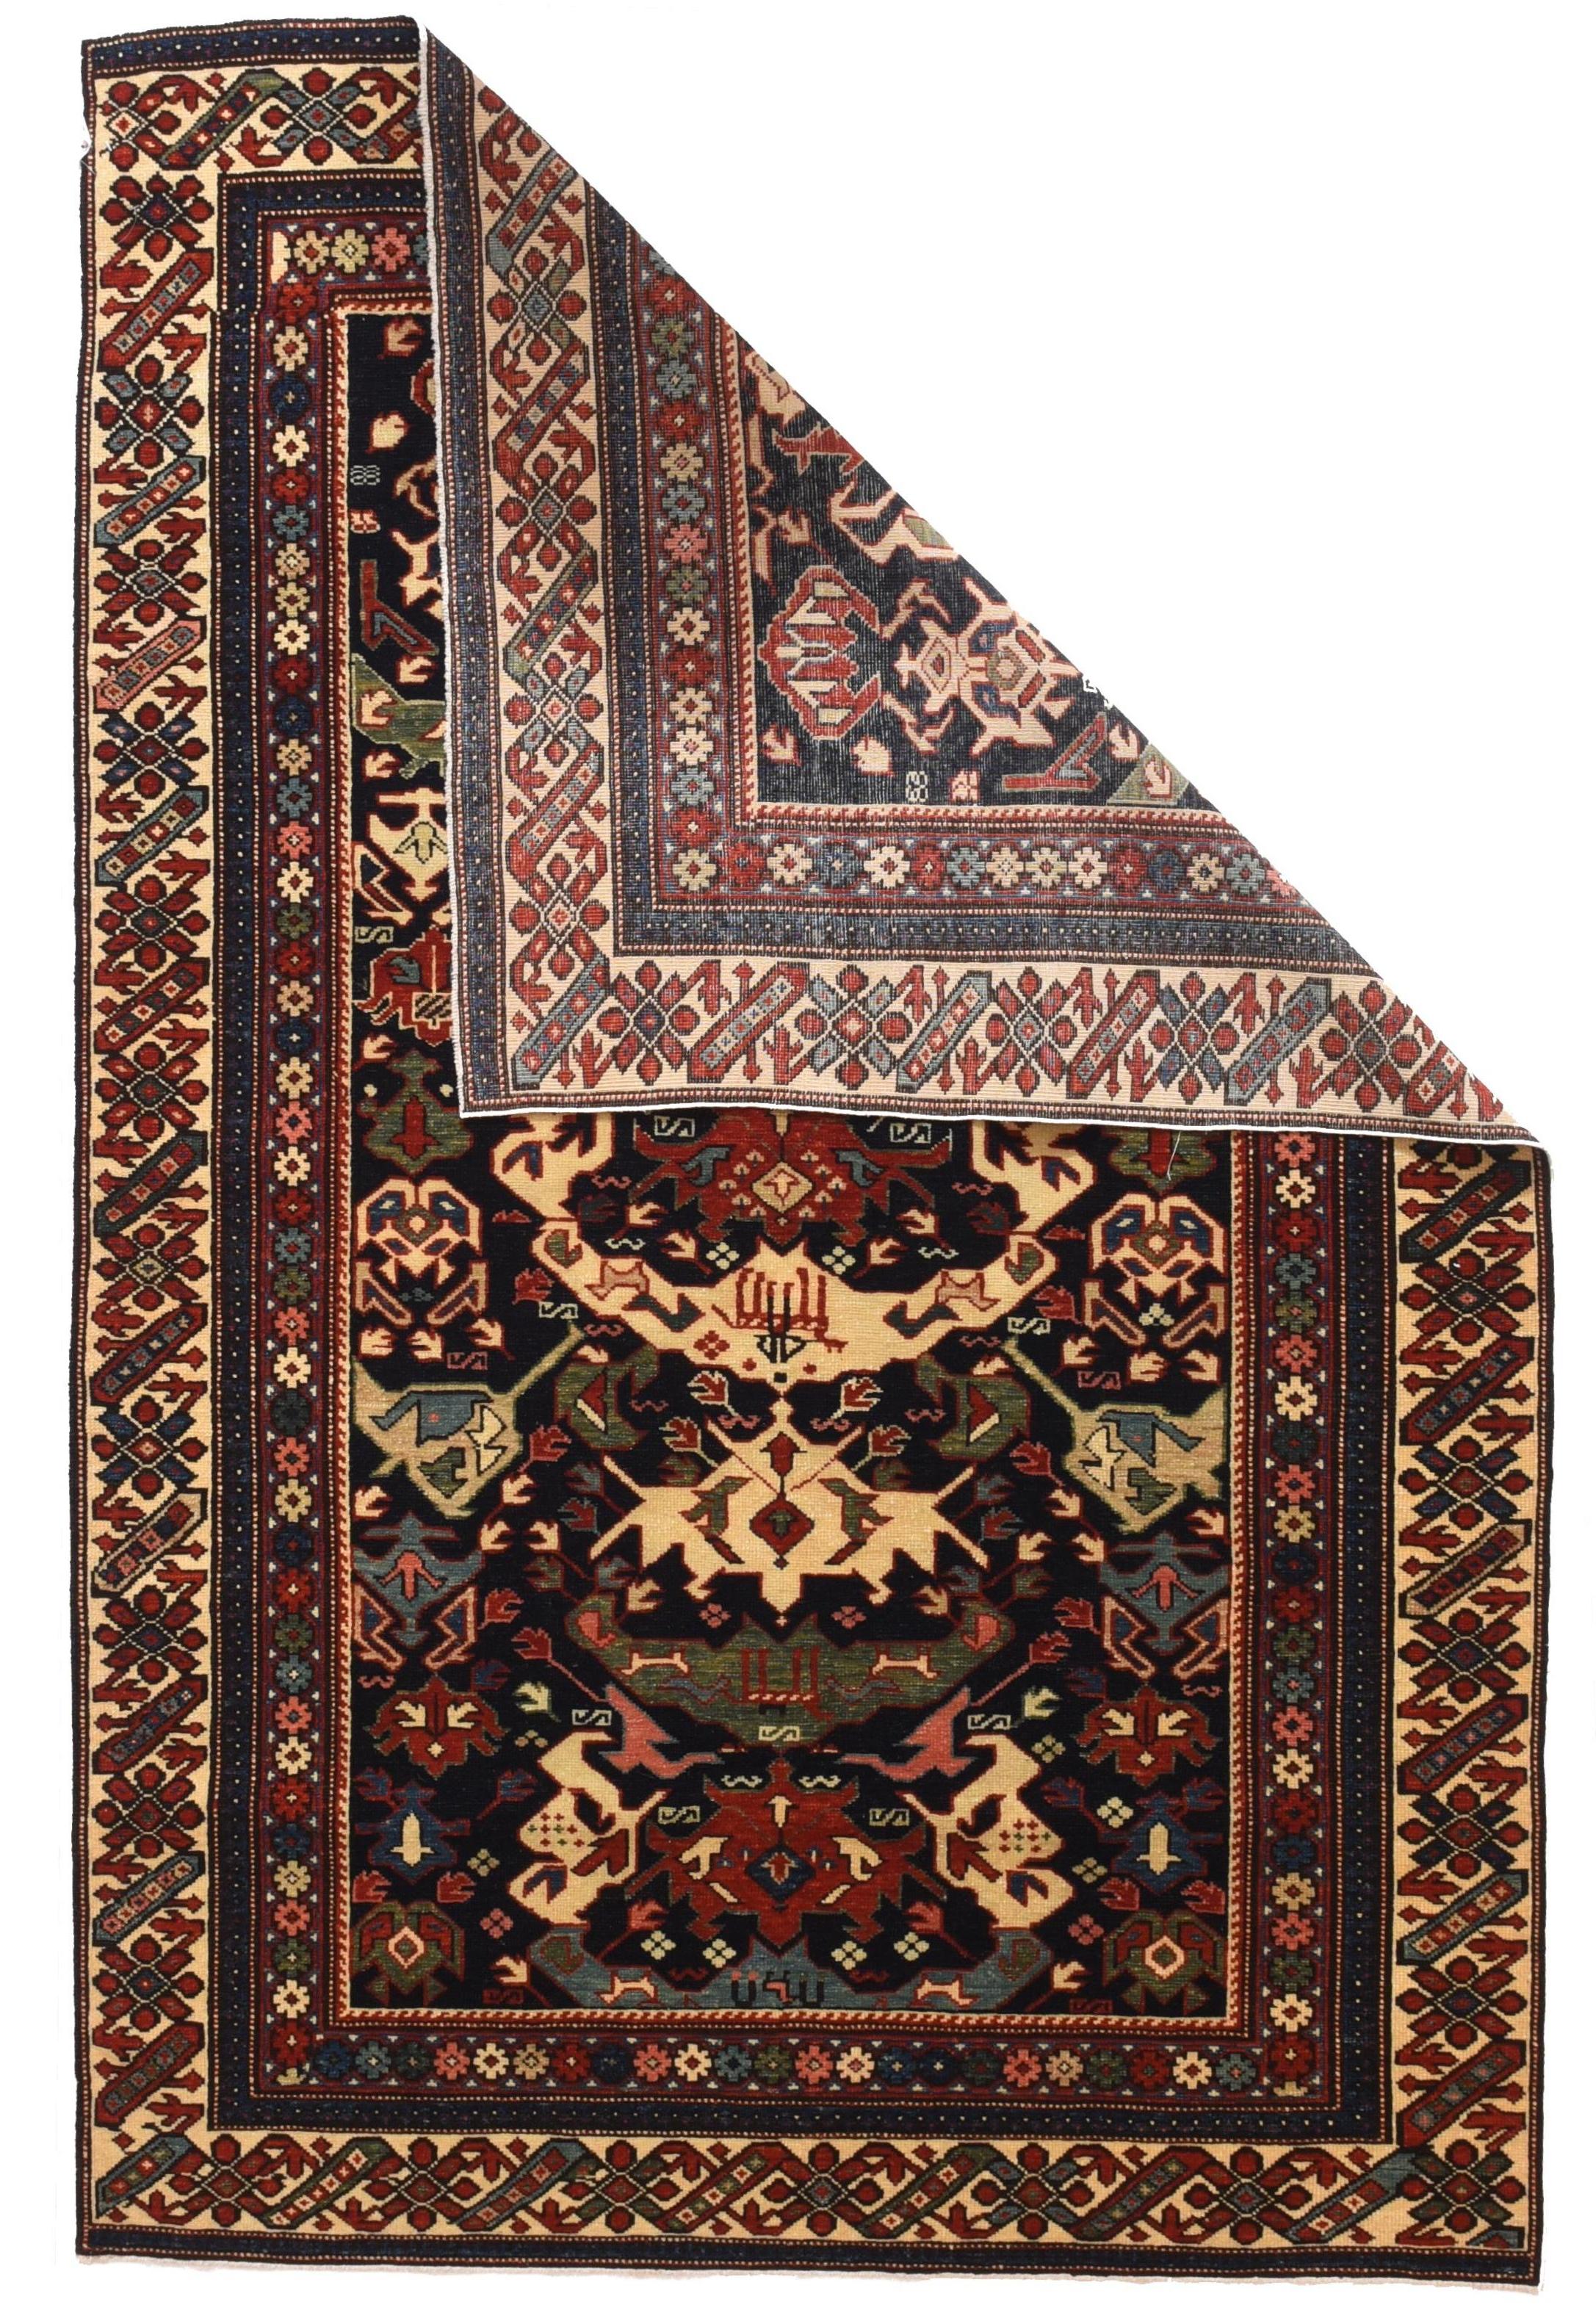 This east Caucasian, moderately finely woven, good condition scatter combines an ivory ground rosette and diagonal bar border taken from Kuba Chi-Chi rugs, with a dark blue field decorated by a complex ascending pattern of various types of geometric